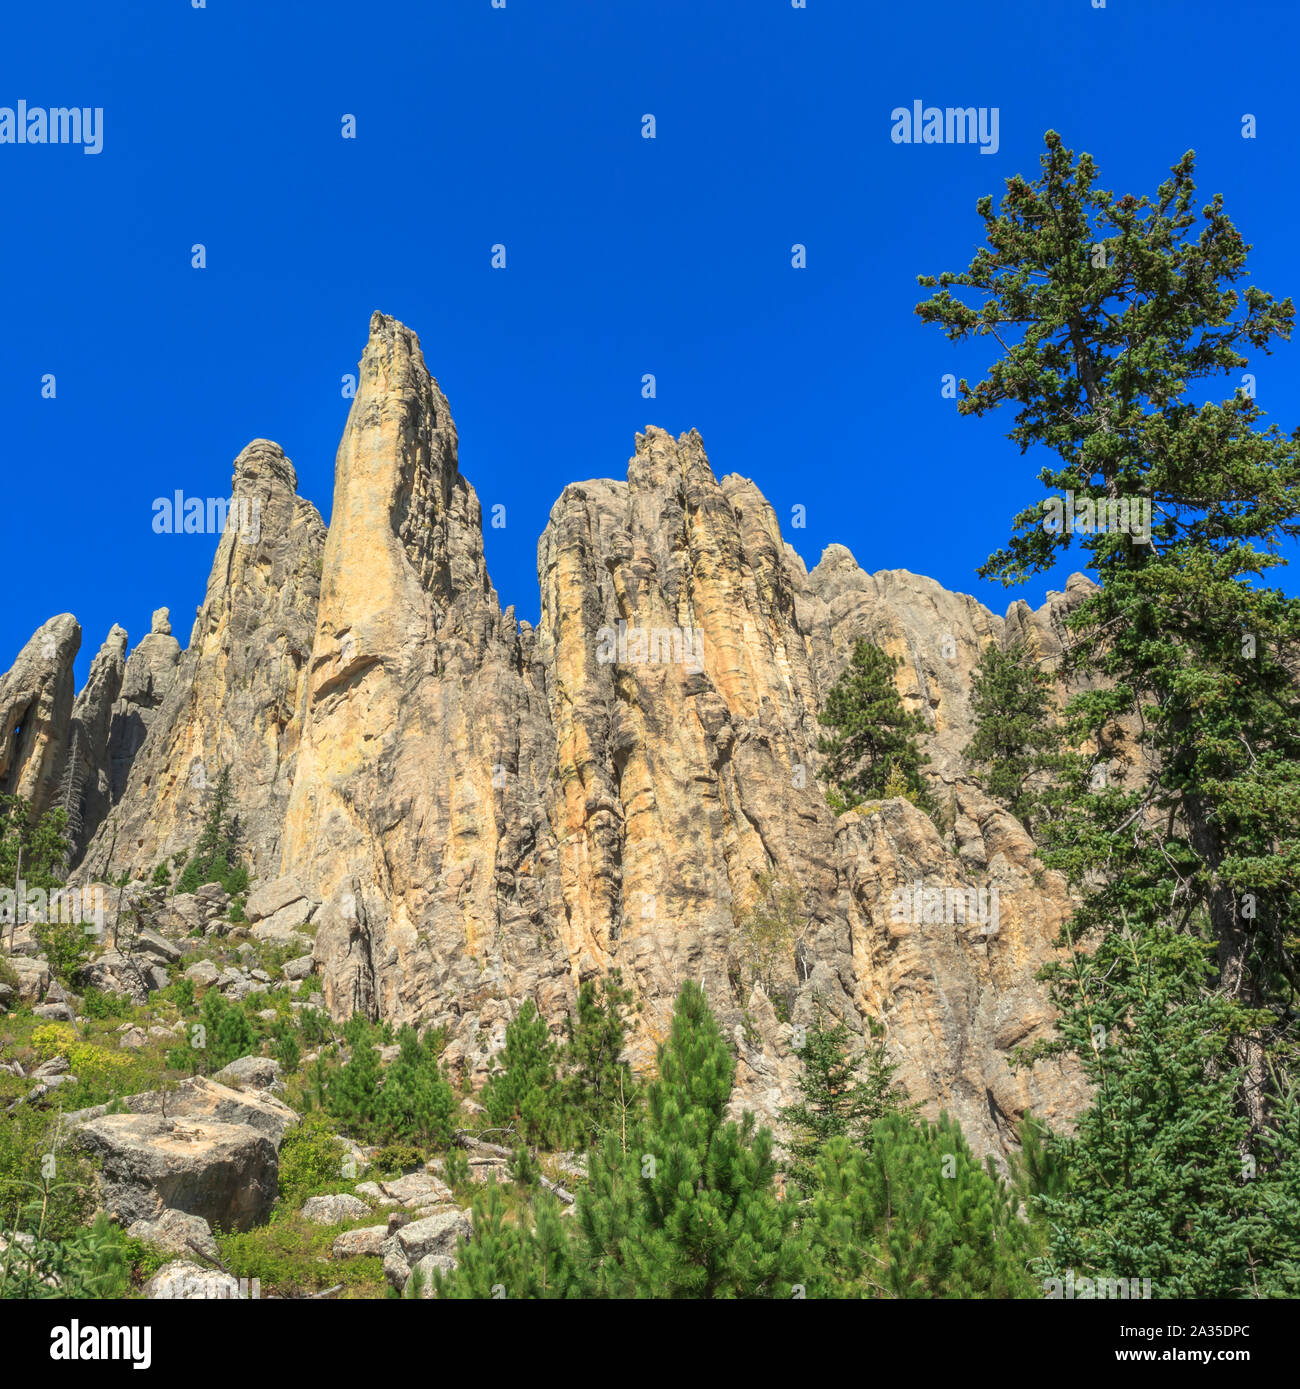 All 105+ Images what is the name of the dramatic granite spires towering over custer state park in south dakota? Excellent